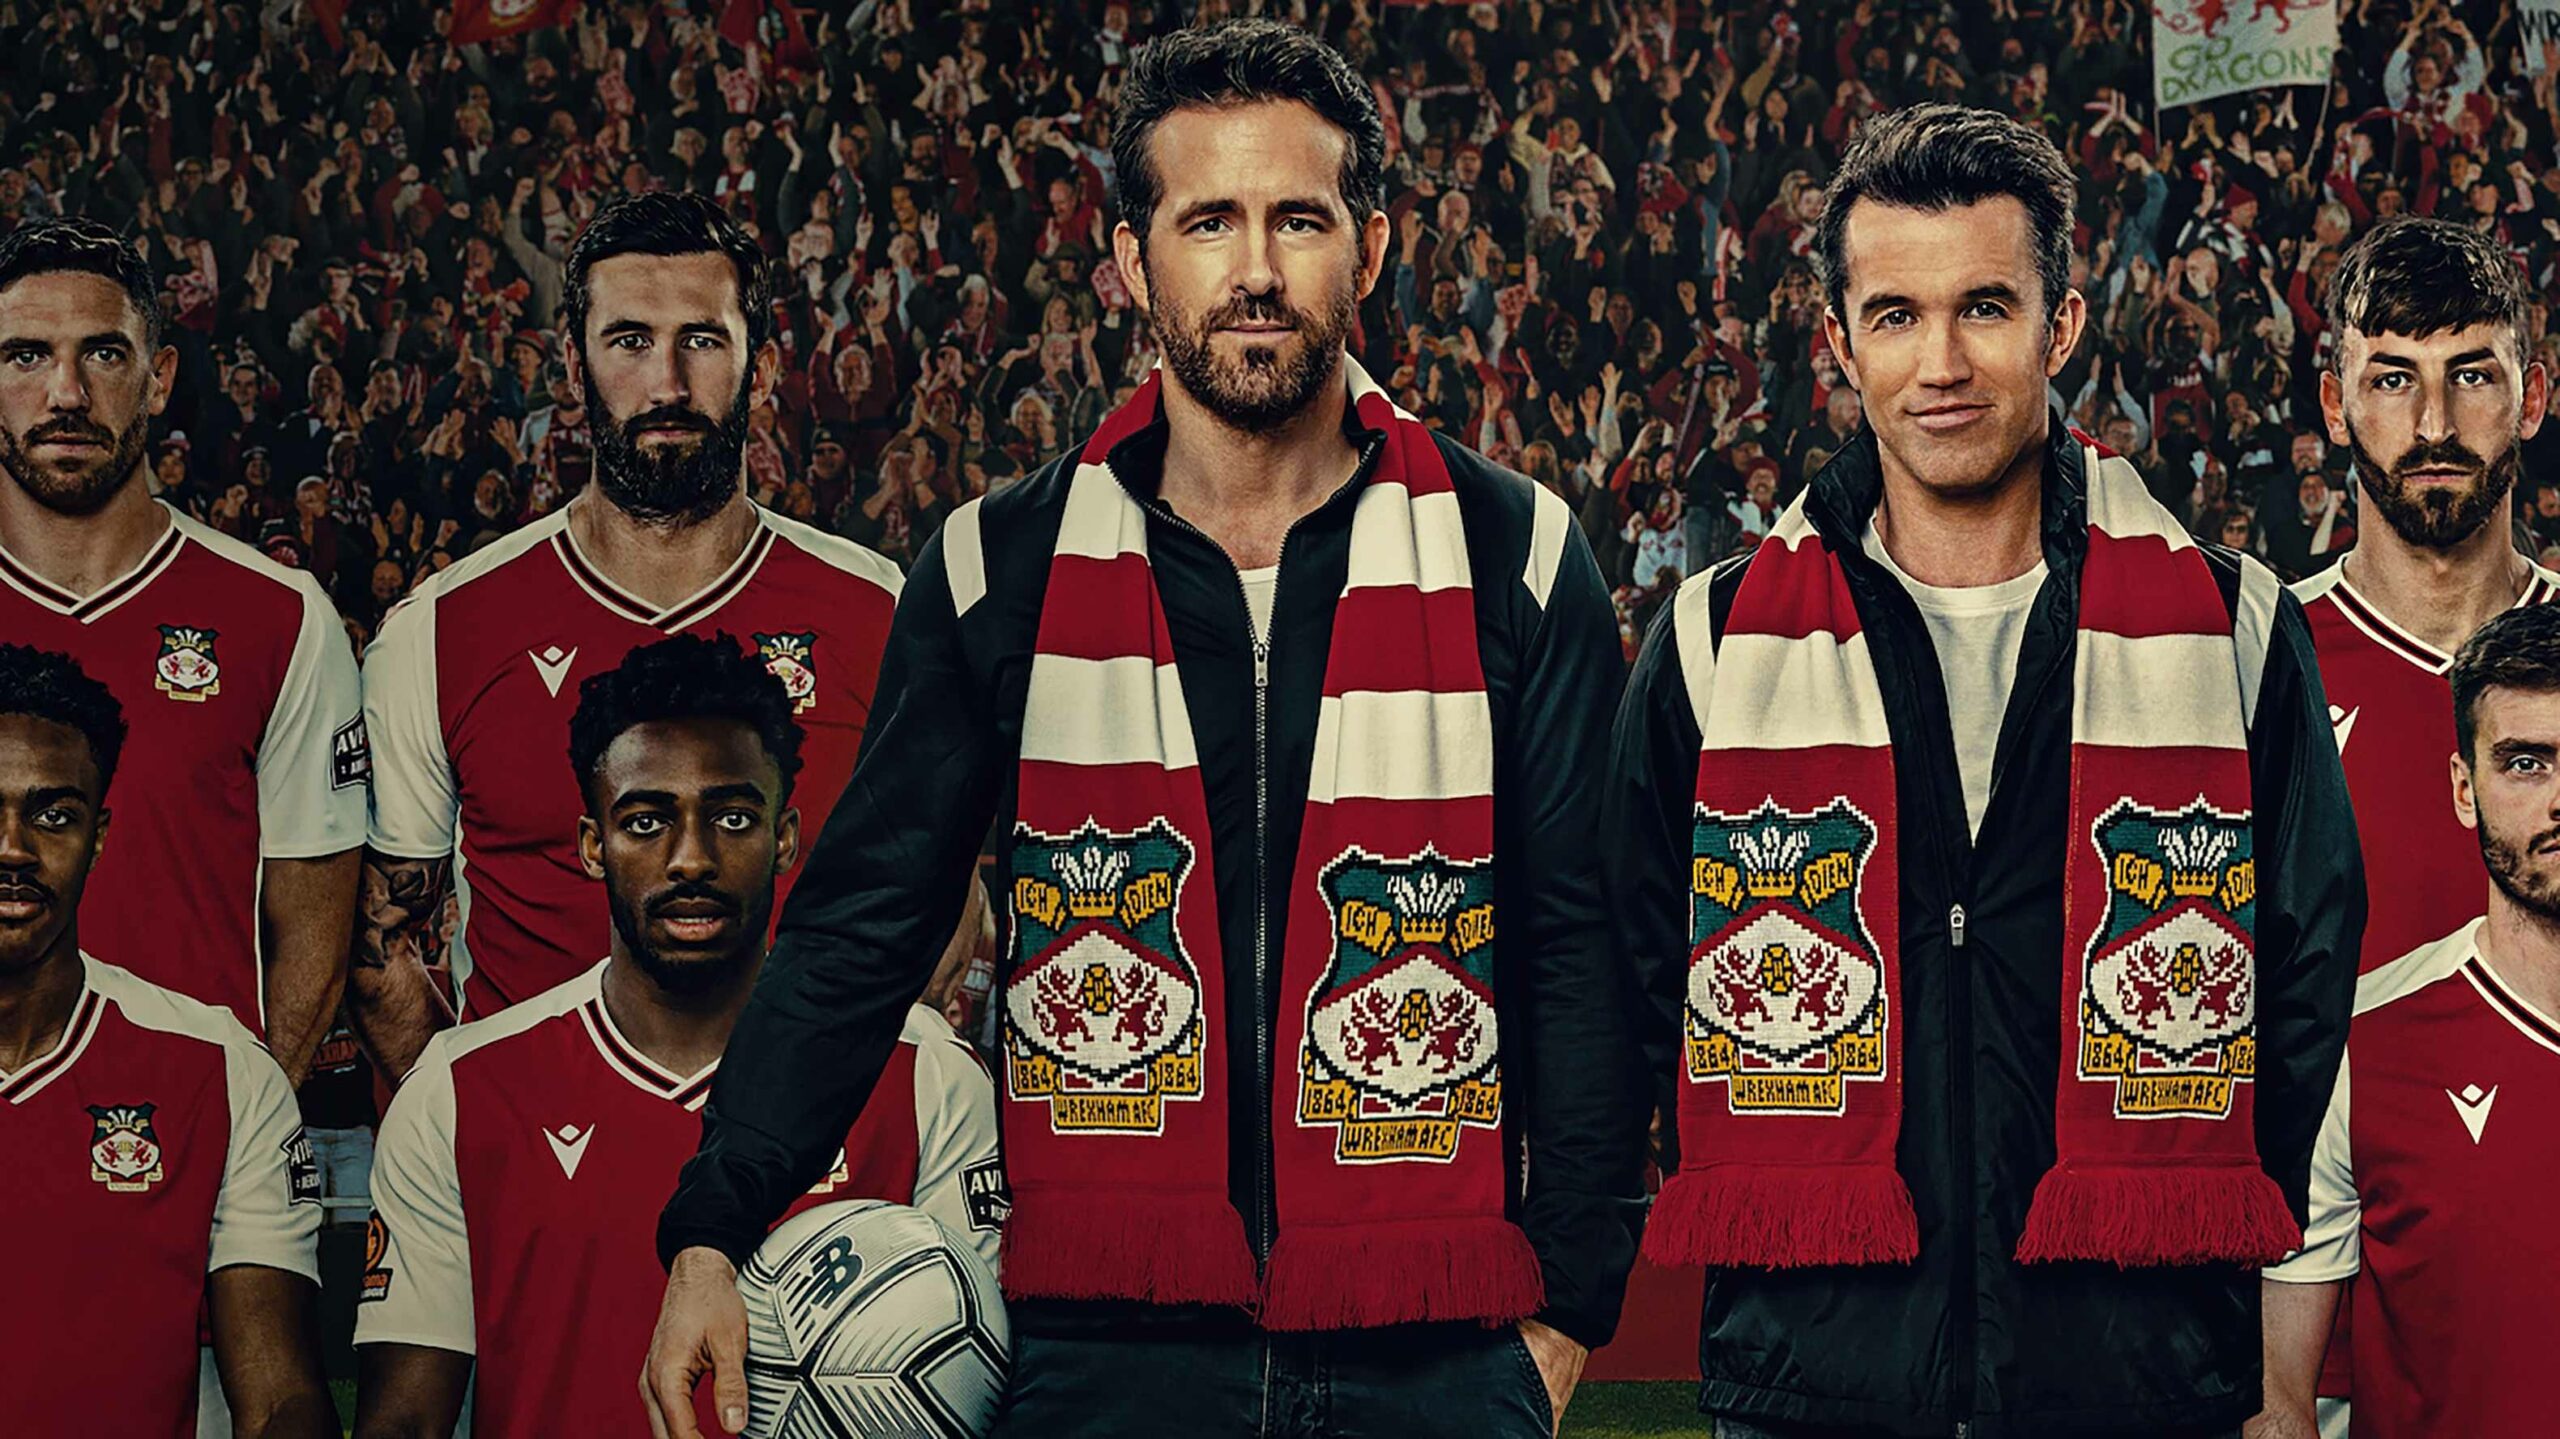 FIFA 23 players discover Ryan Reynolds cameos months after launch